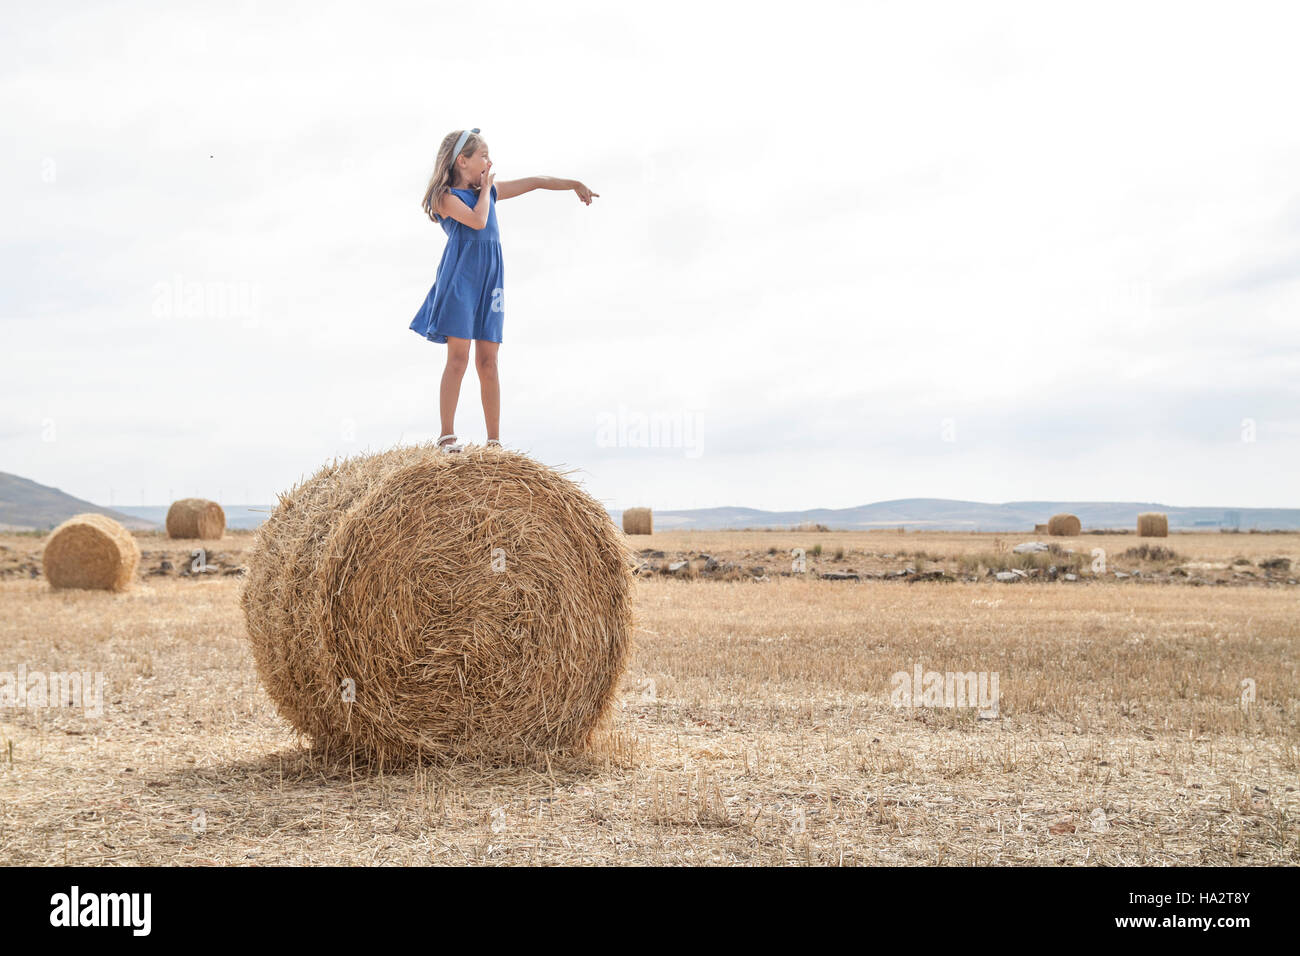 Girl standing on a hay bale in a field Stock Photo